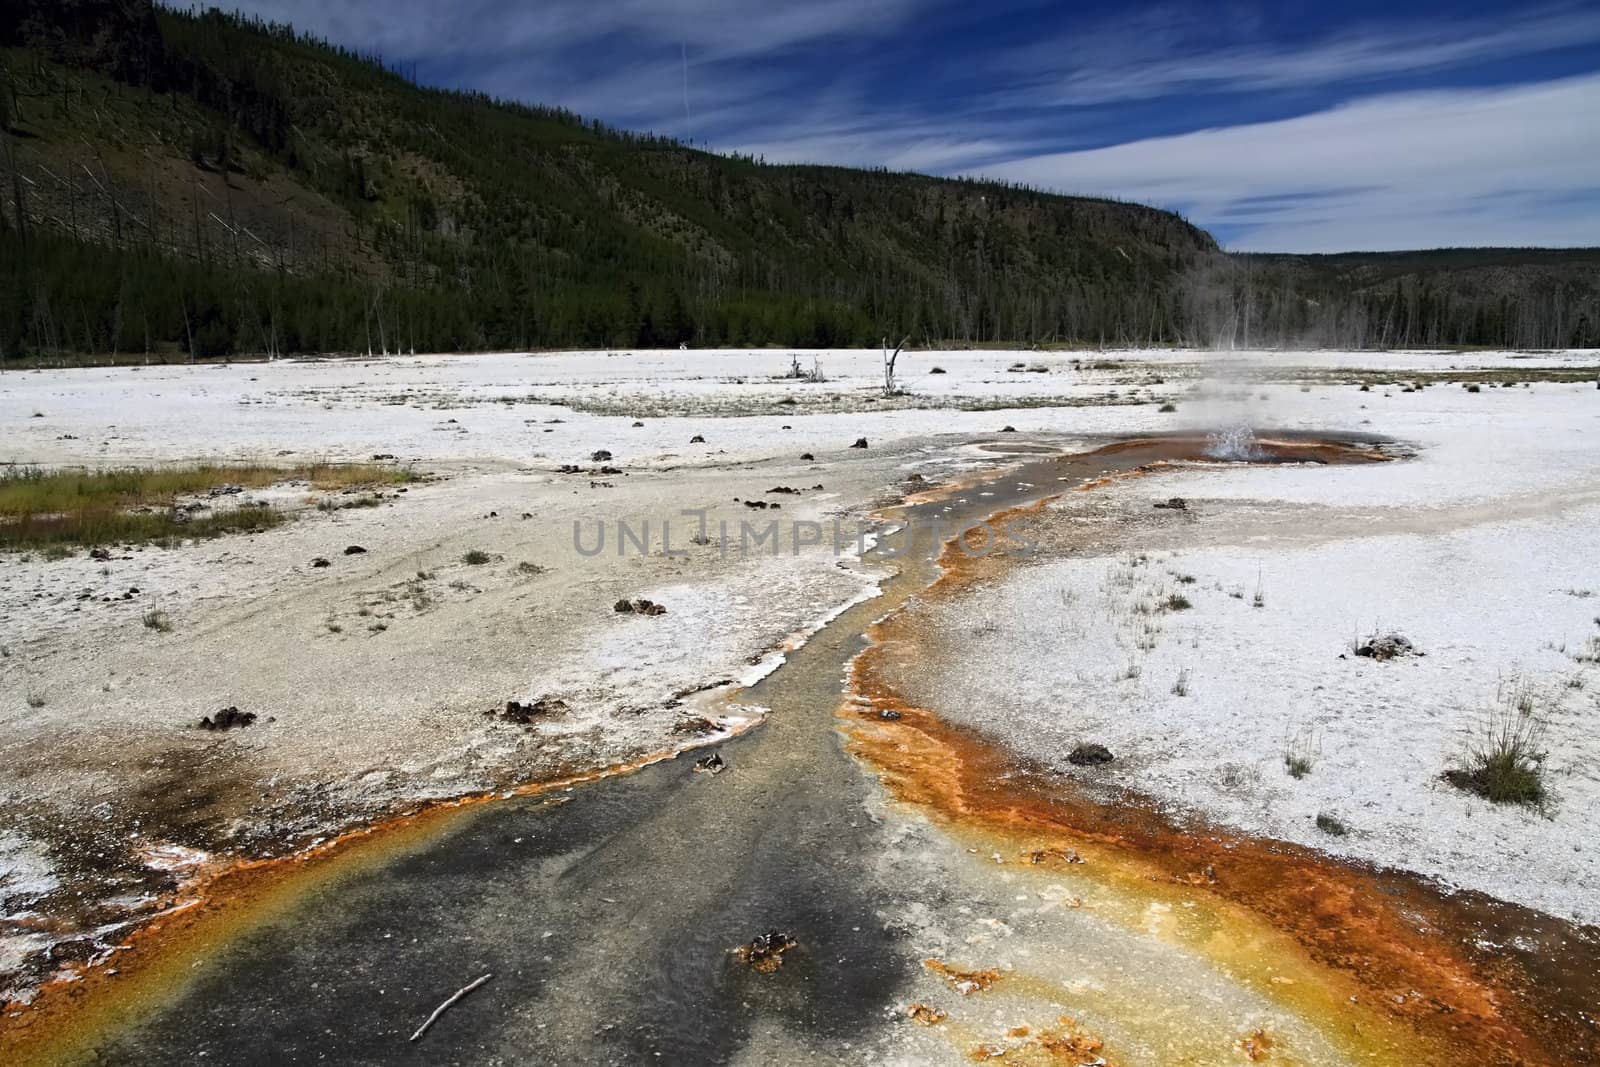 Plumes of steam soar  above  meadows as geysers erupt in Yellowstone National Park

